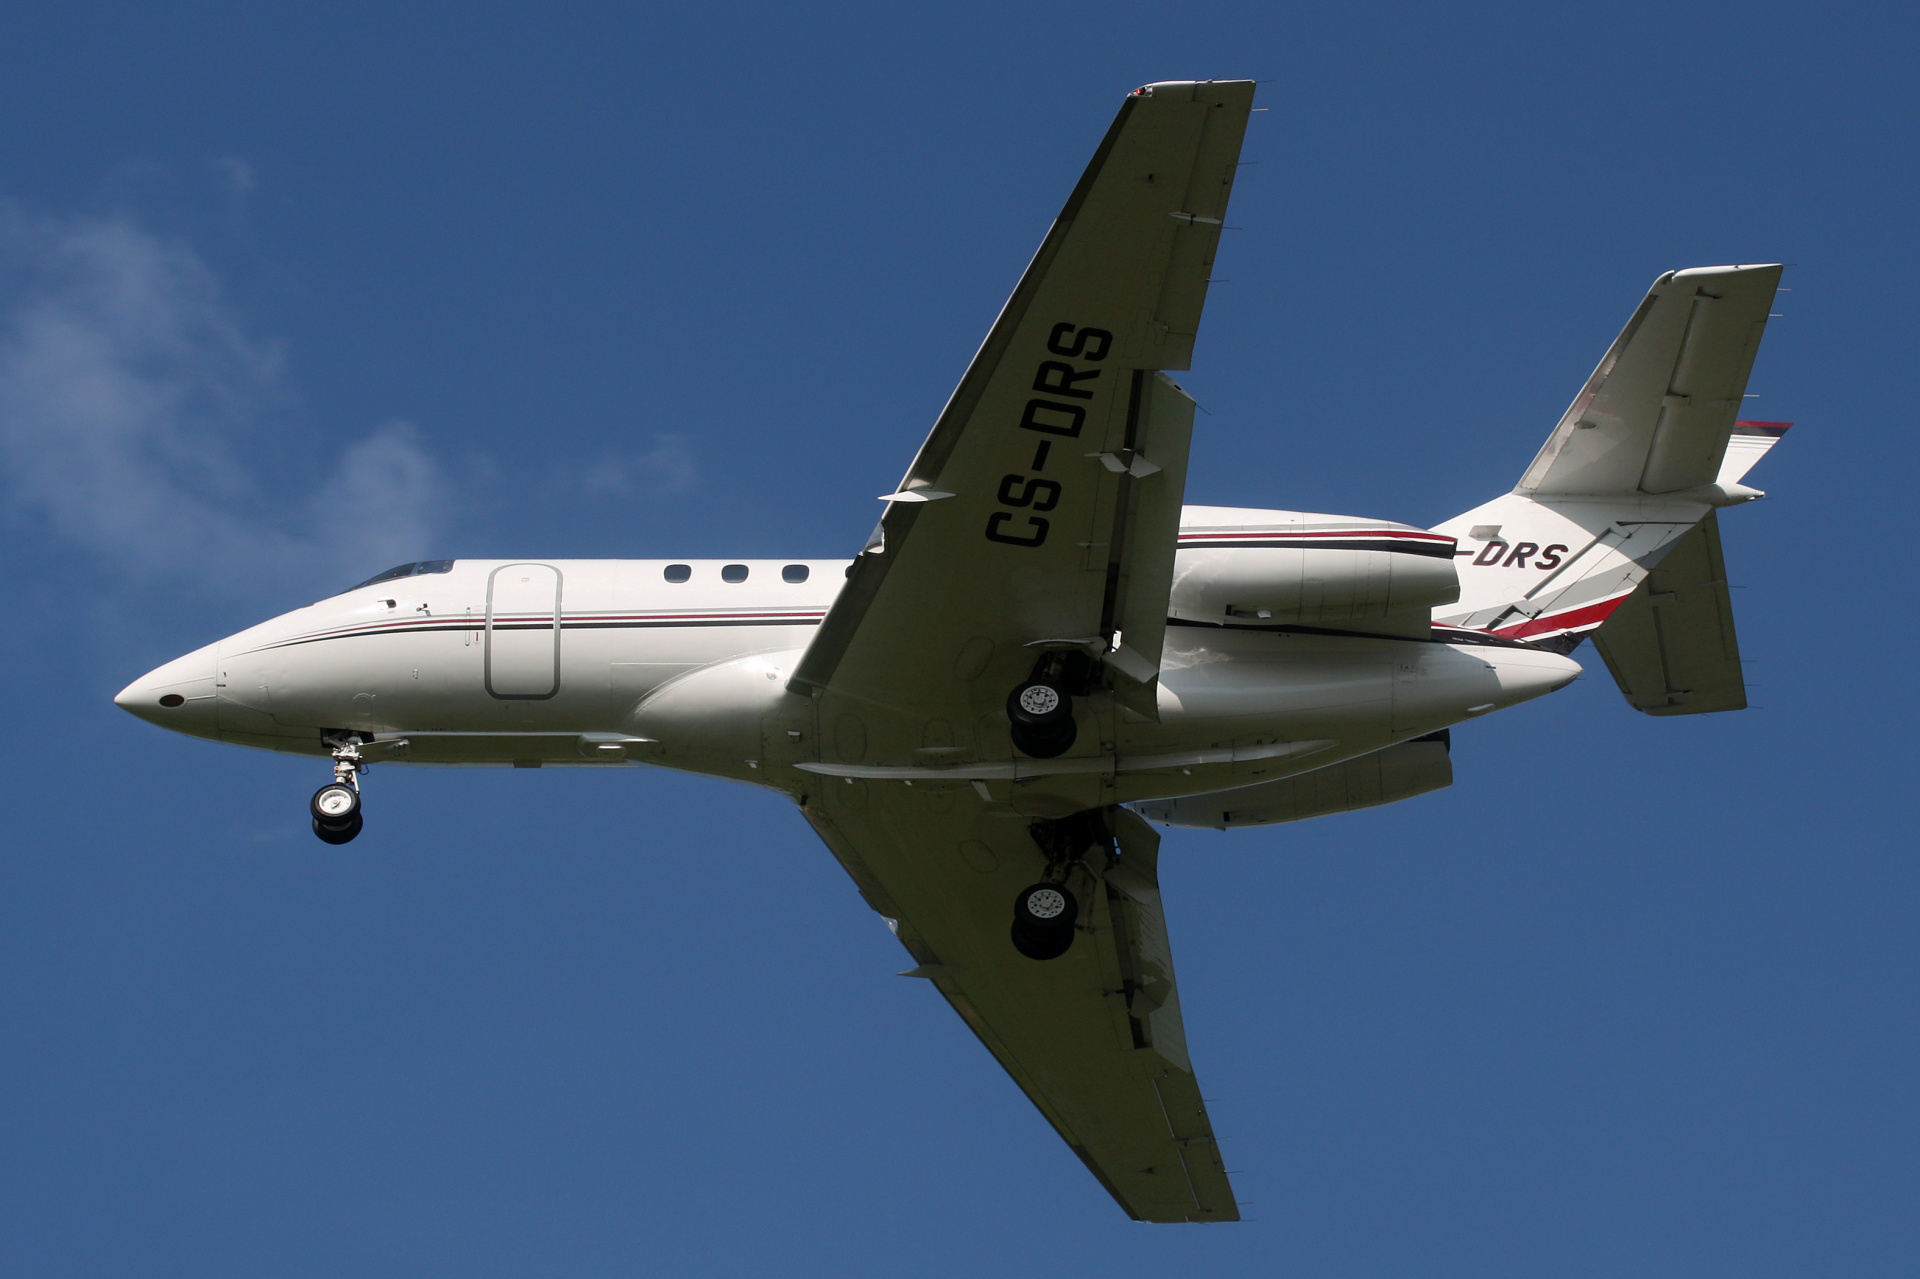 CS-DRS, NetJets Europe (Aircraft » EPWA Spotting » BAe 125 and revisions » Raytheon Hawker 800XP)